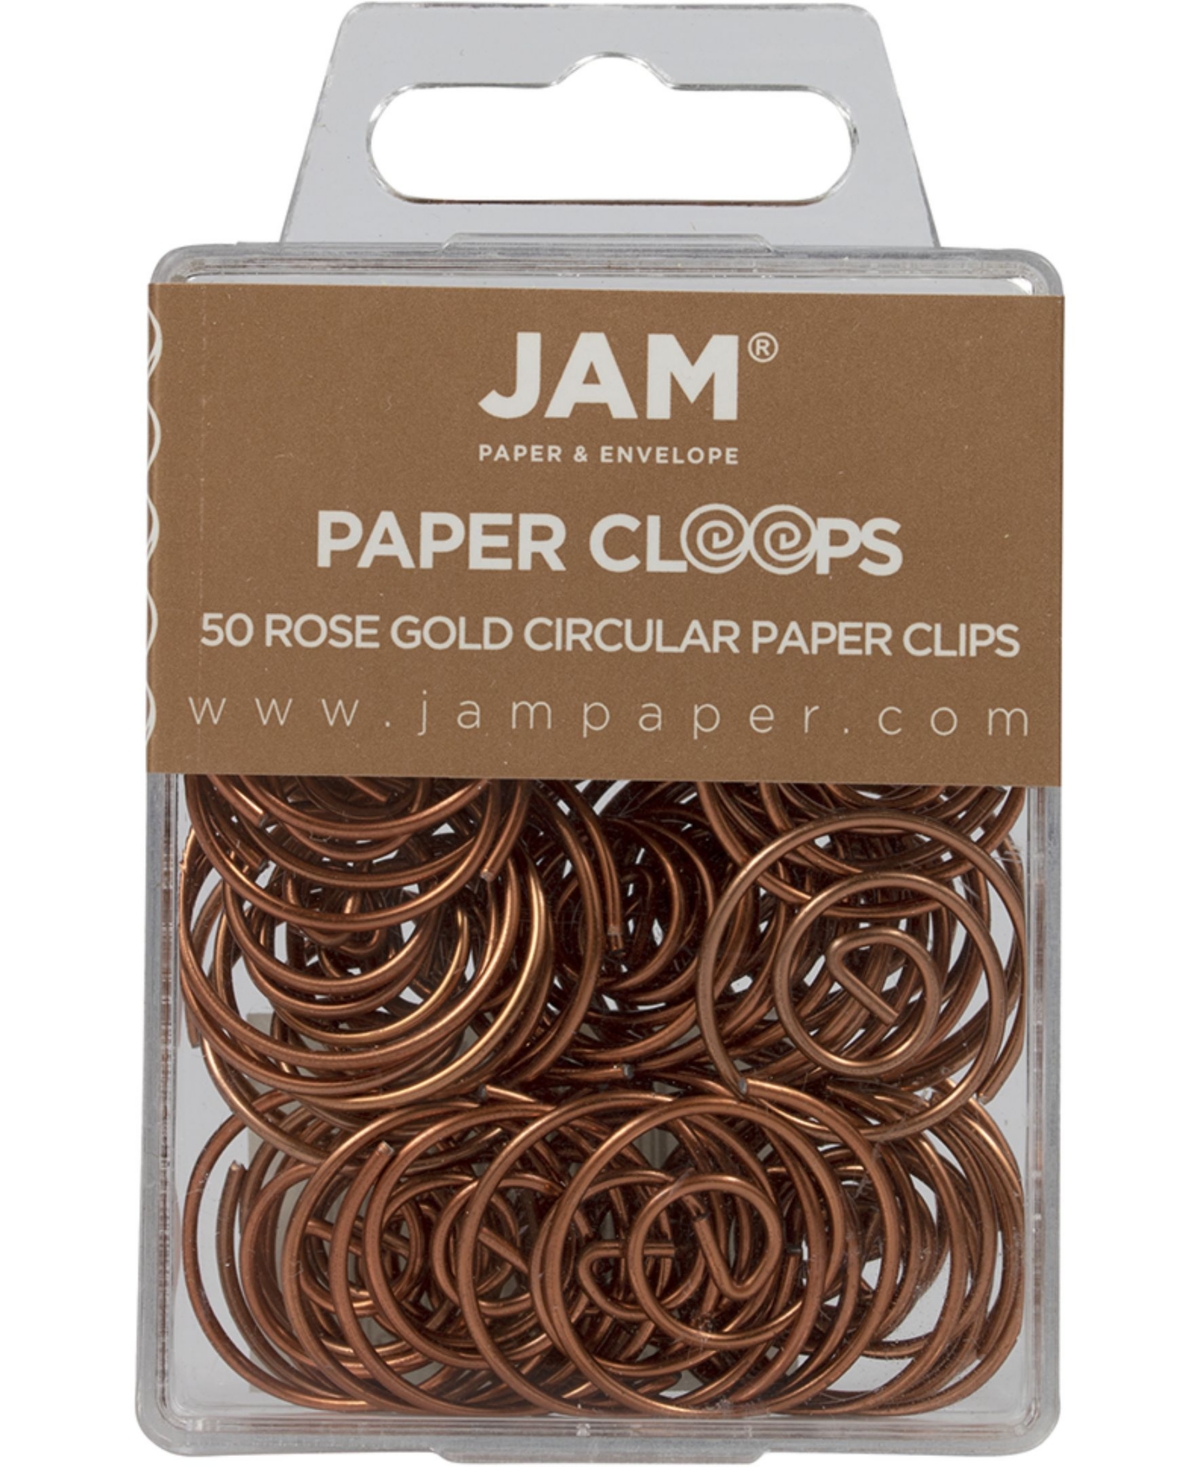 Circular Paper Clips - Round Paperclips - 50 Per Pack - Rose Gold